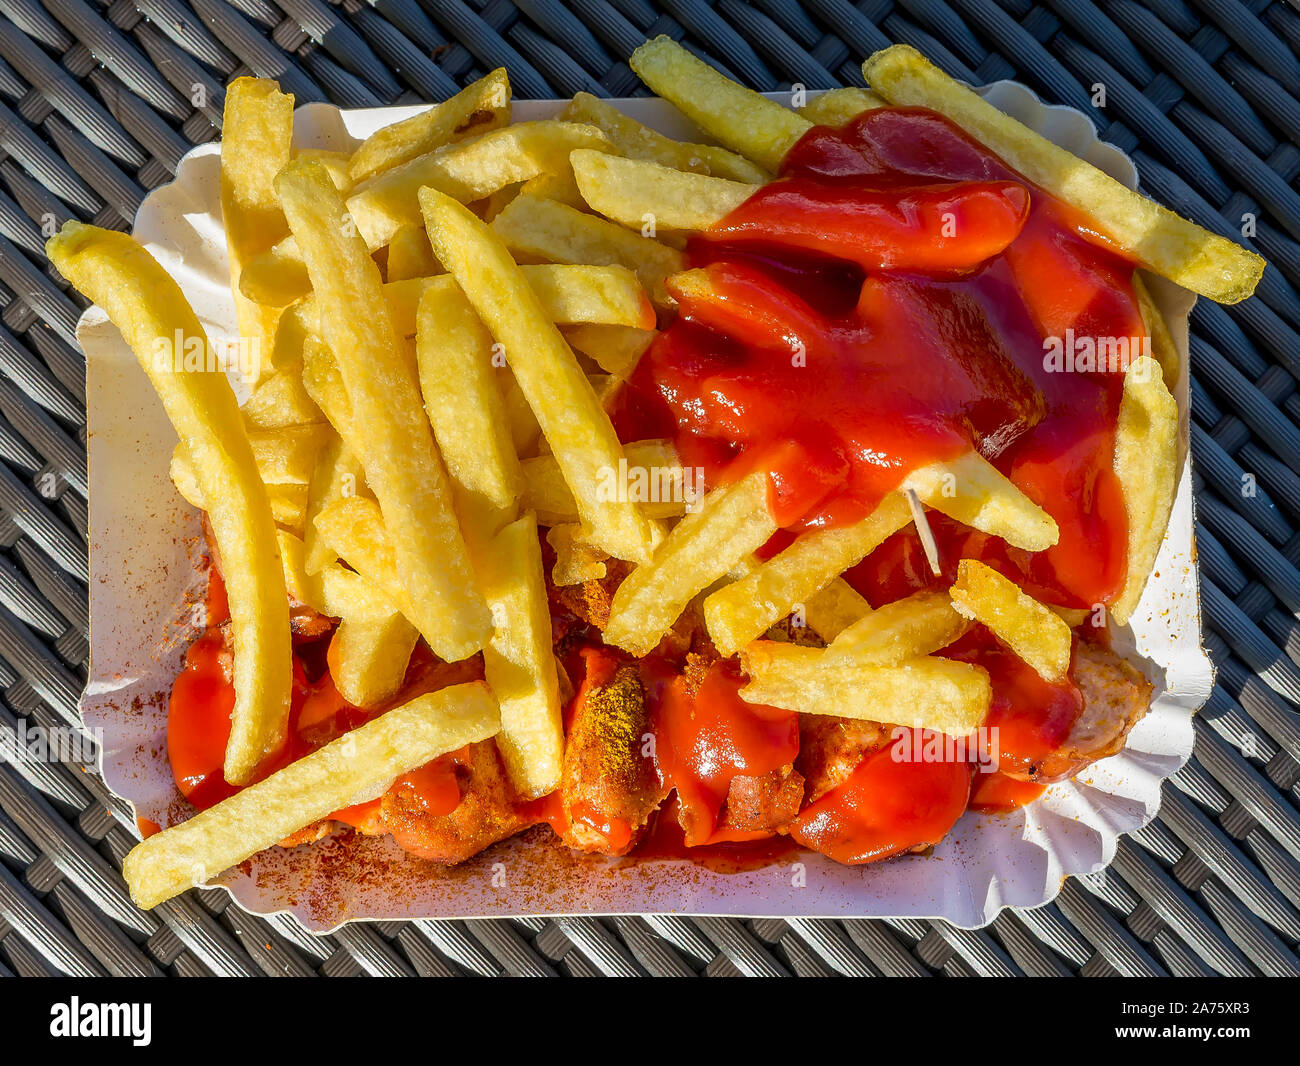 Delicious cardboard plate filled with ketchup-coated fries accompanied by currywurst, a German culinary specialty, to eat outdoors Stock Photo